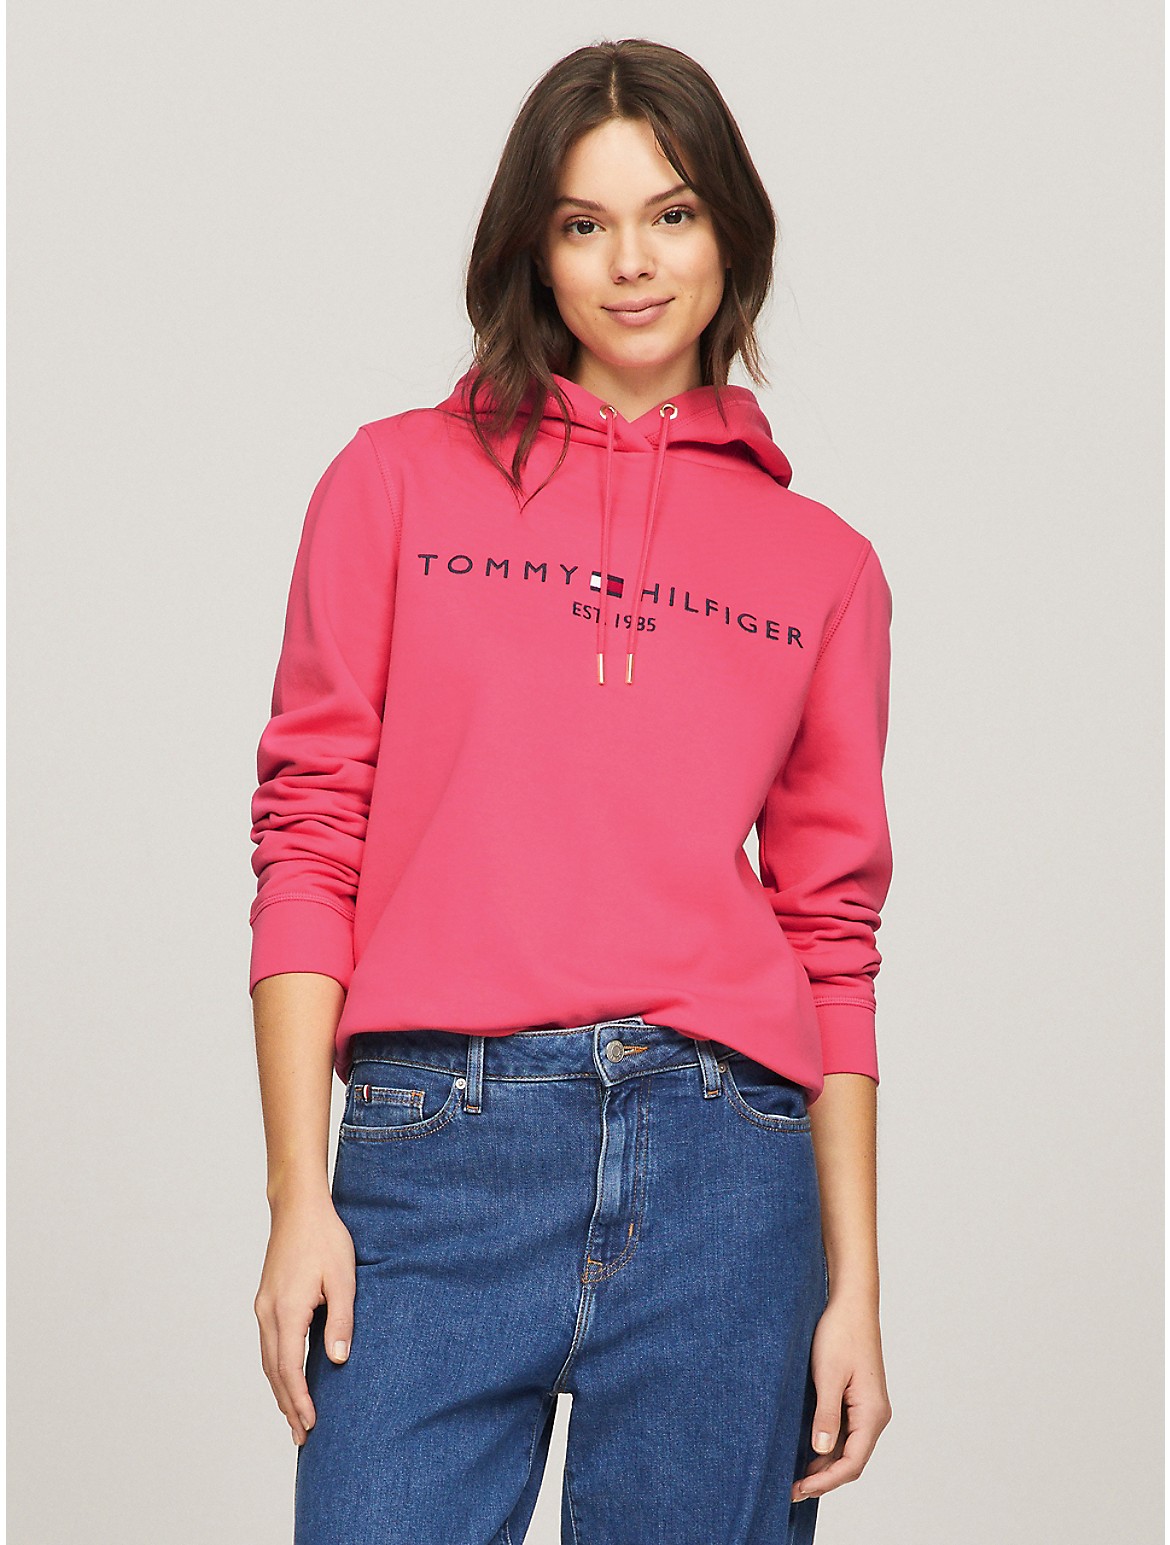 Tommy Hilfiger Women's Embroidered Tommy Logo Hoodie - Pink - L